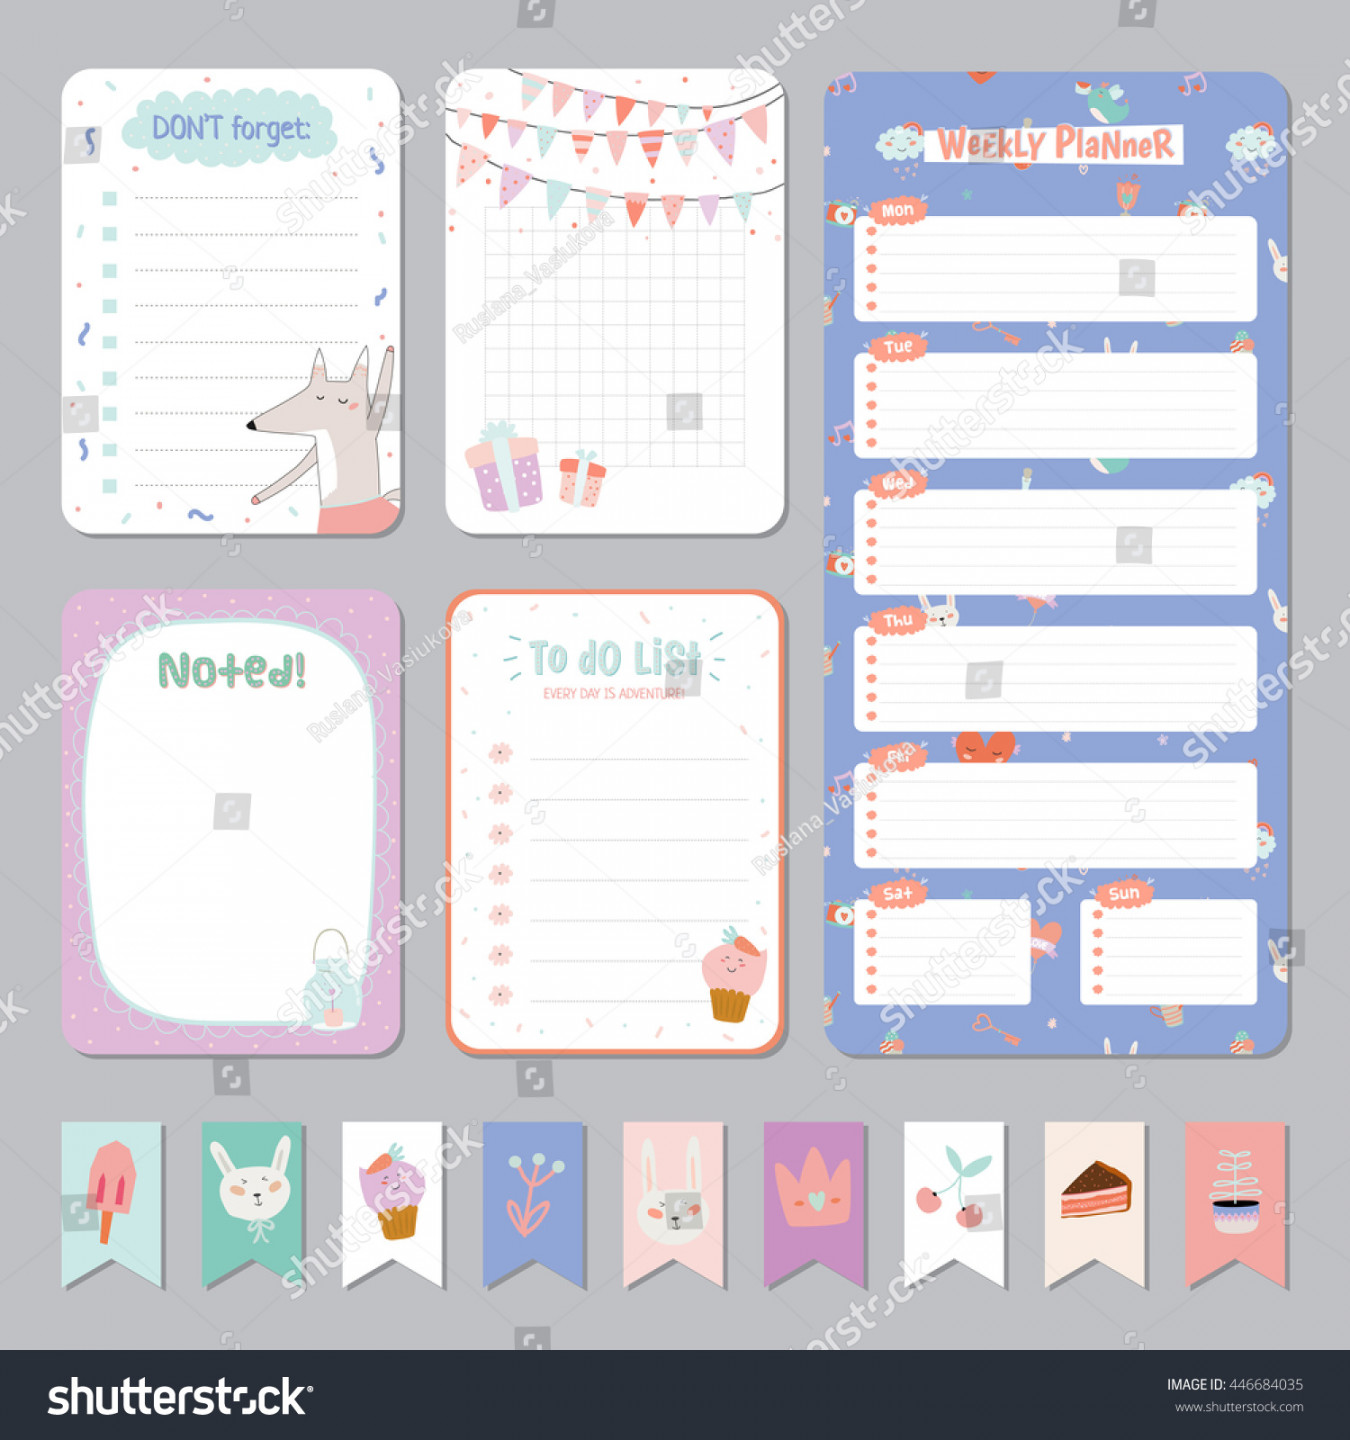 Cute Calendar Daily Weekly Planner Template Stock Vector (Royalty